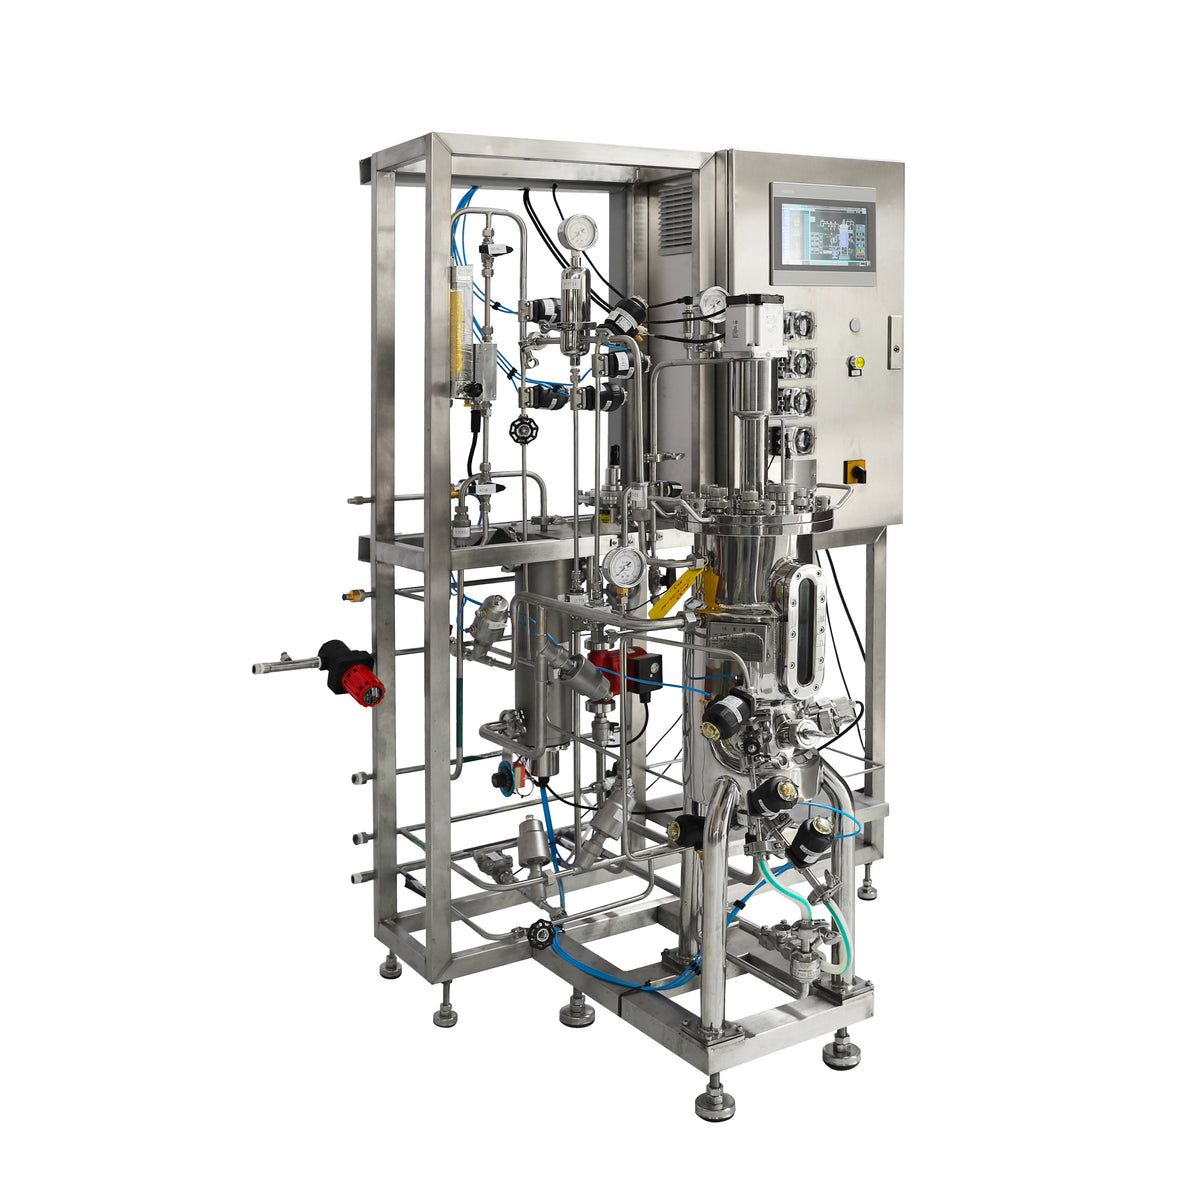 500L Stainless Steel Bioreactor for Microbial Fermentation with 2 Gas Inlets BR500-M1